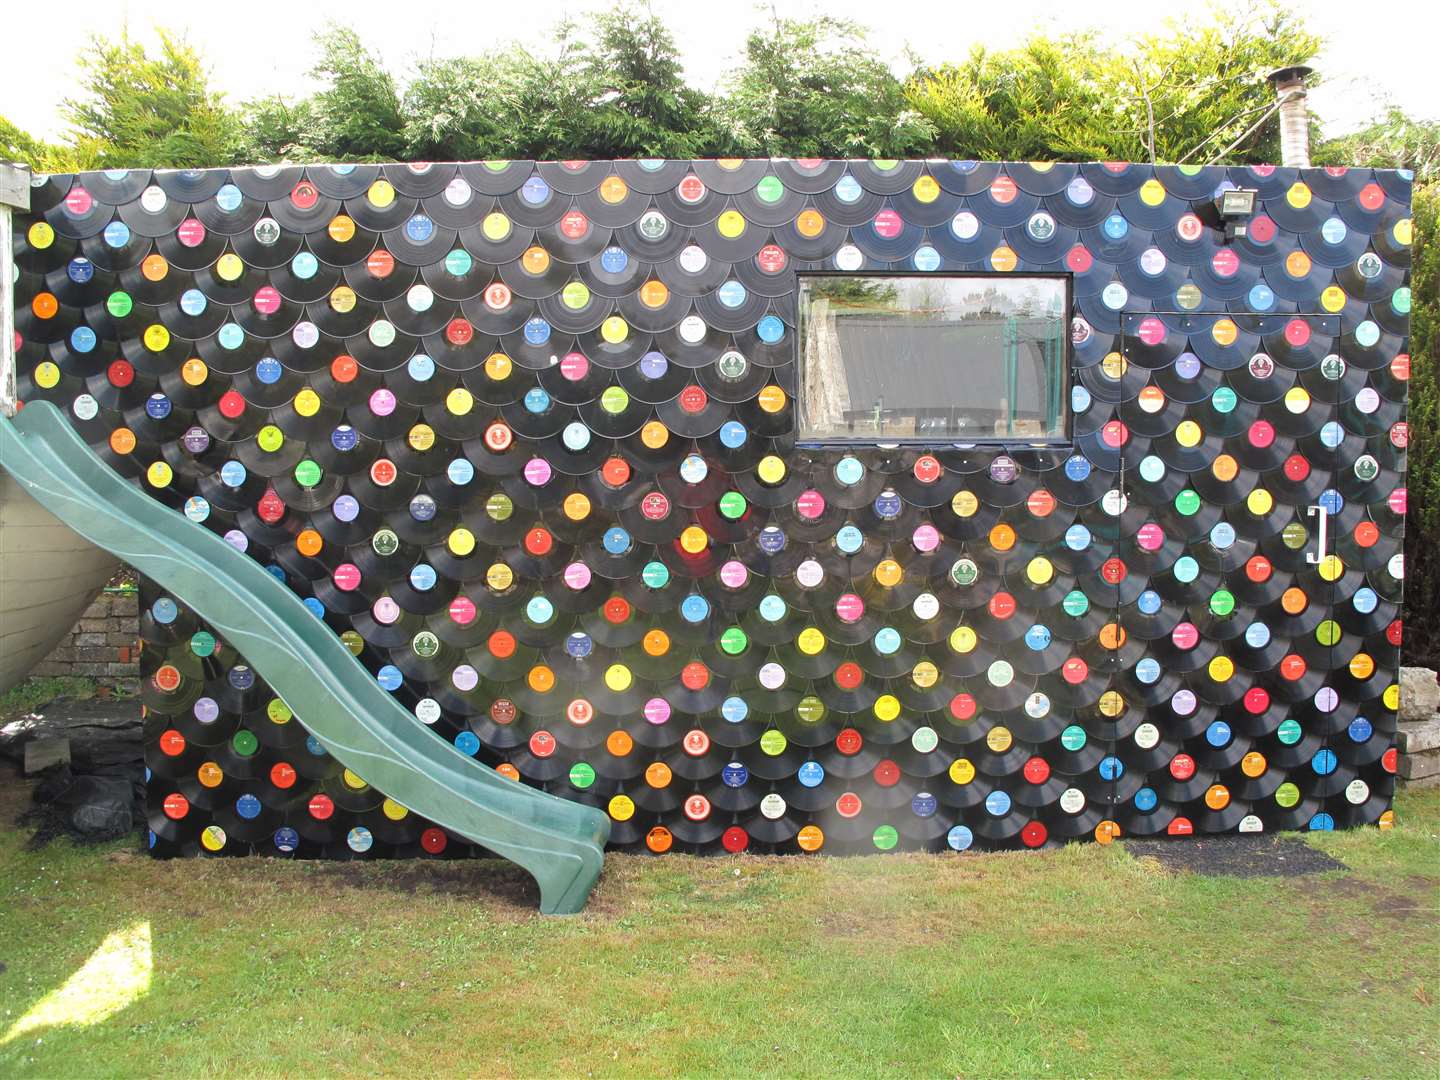 It took some 400 records to give the garden shed a colourful new look.